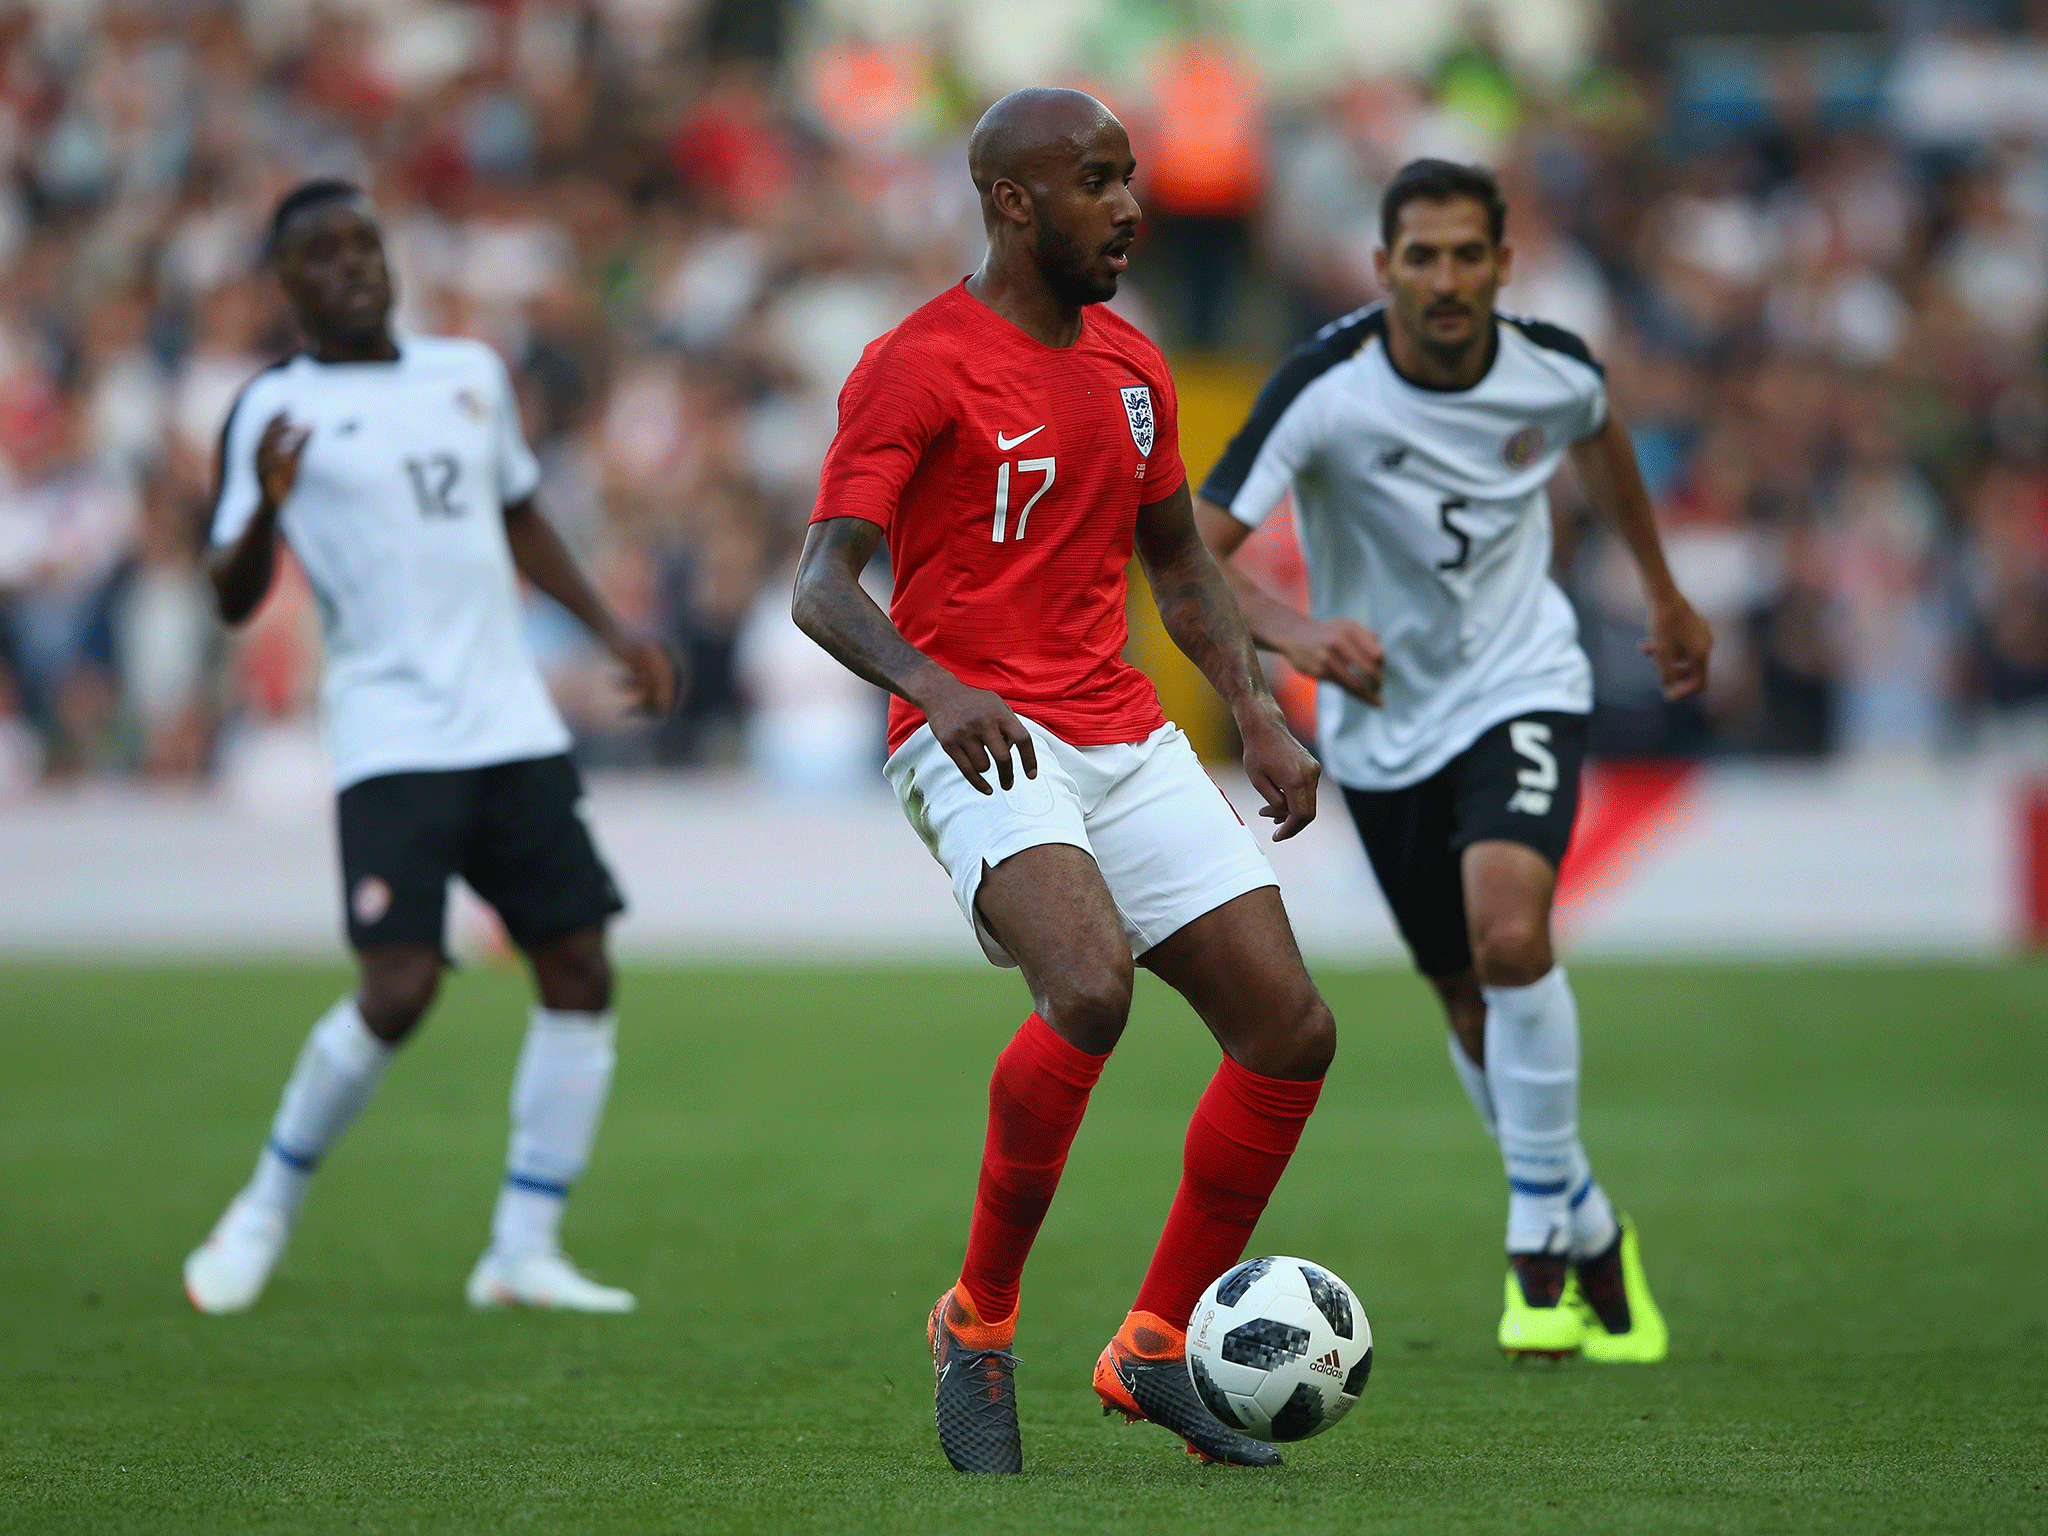 Fabian Delph in action during England's friendly against Costa Rica